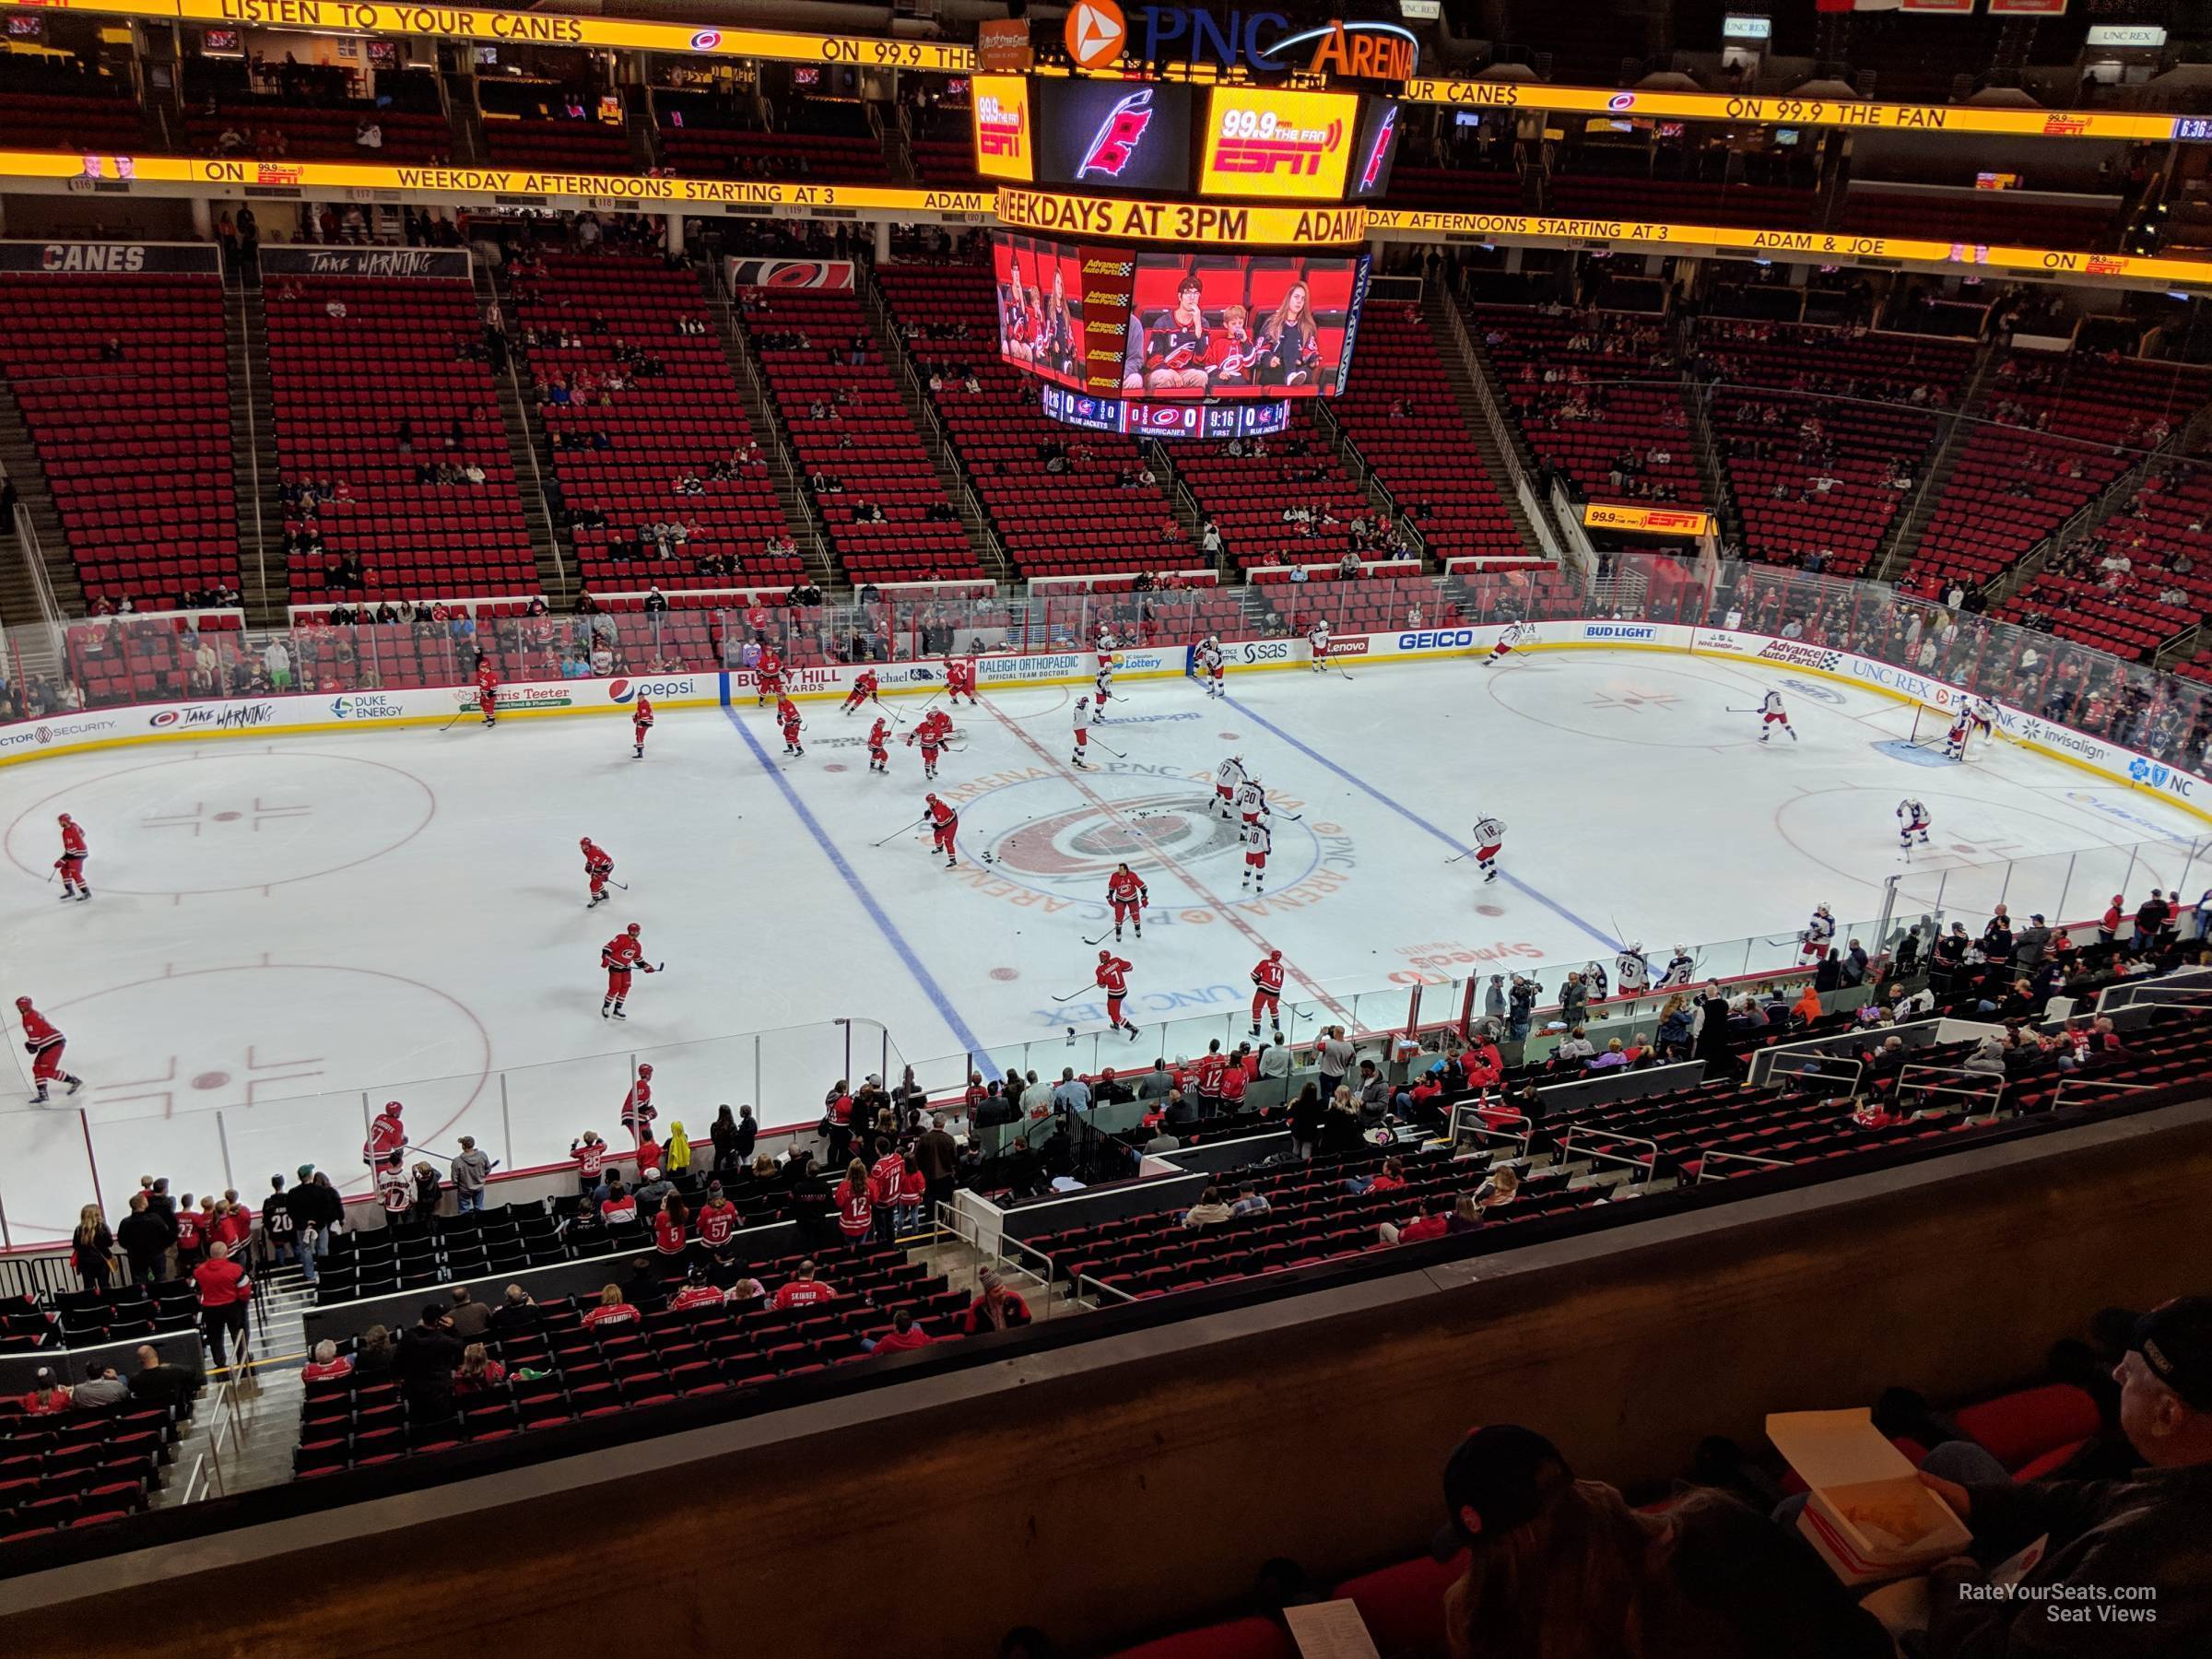 section 206, row de seat view  for hockey - pnc arena